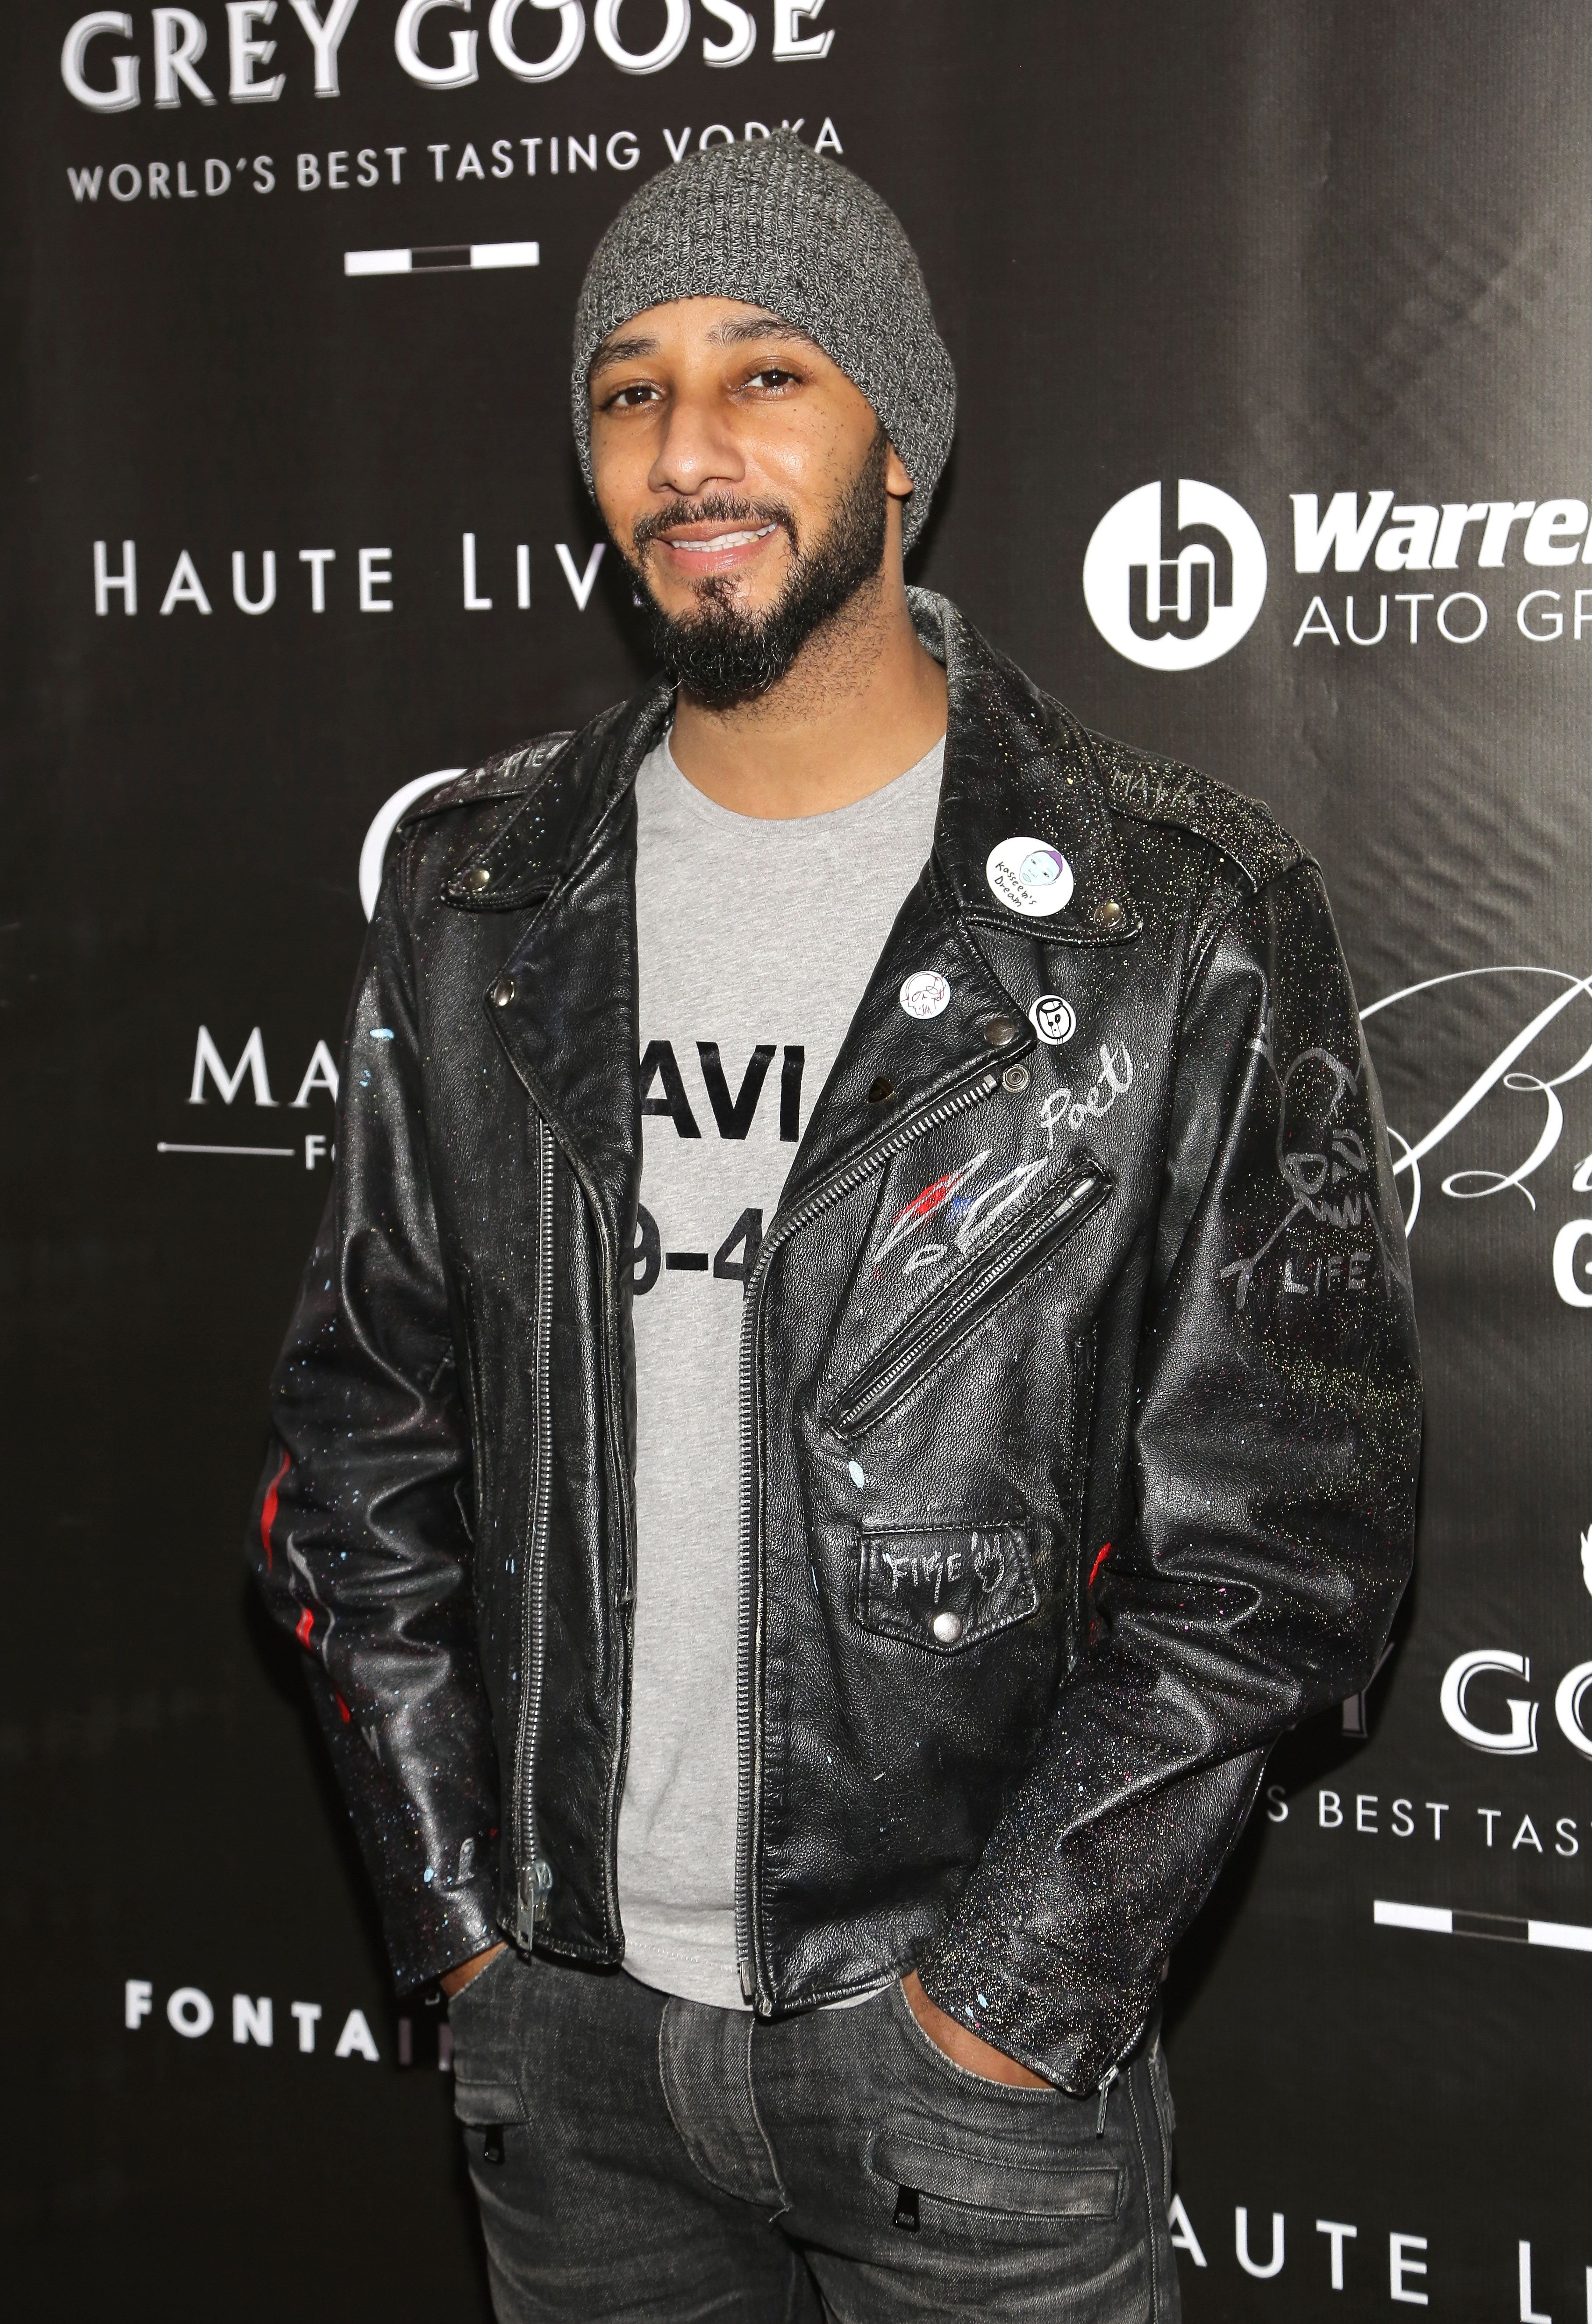 Swizz Beatz during the Blacks' Annual Gala at Fontainebleau Miami Beach on October 25, 2014 in Miami Beach, Florida. | Source: Getty Images